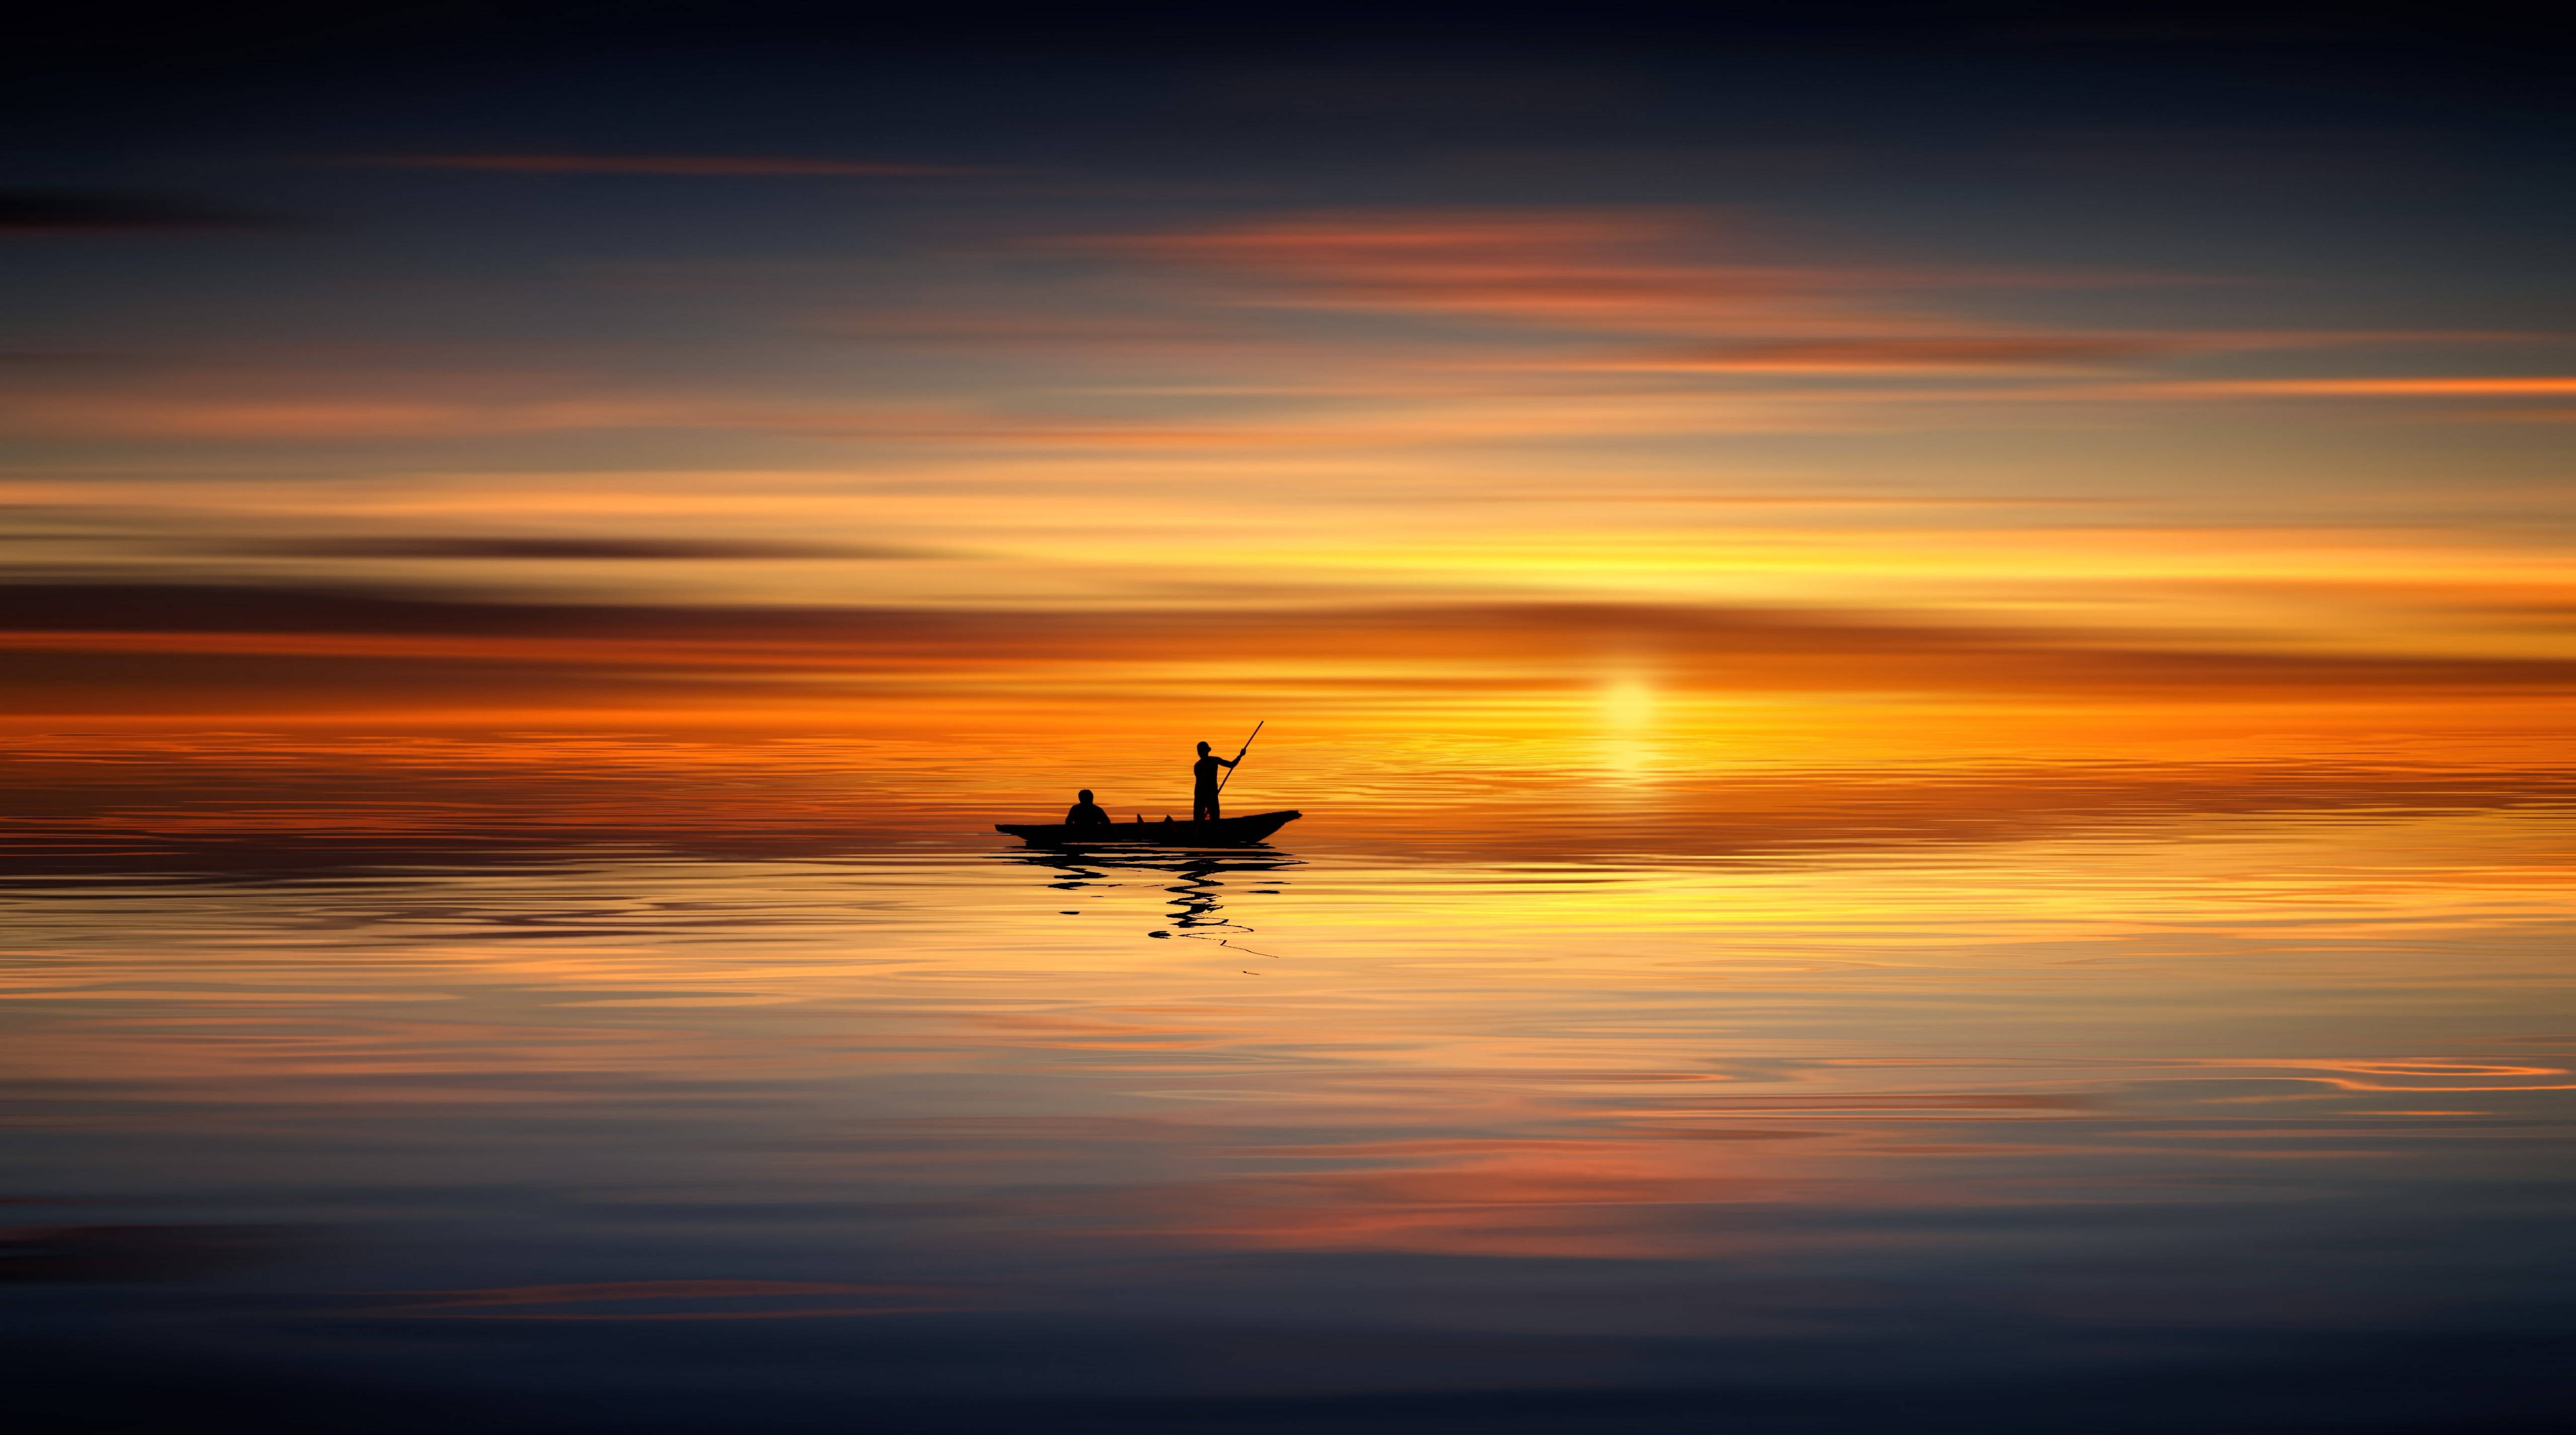 Aesthetic Sunset With Man On Boat Silhouette Wallpaper